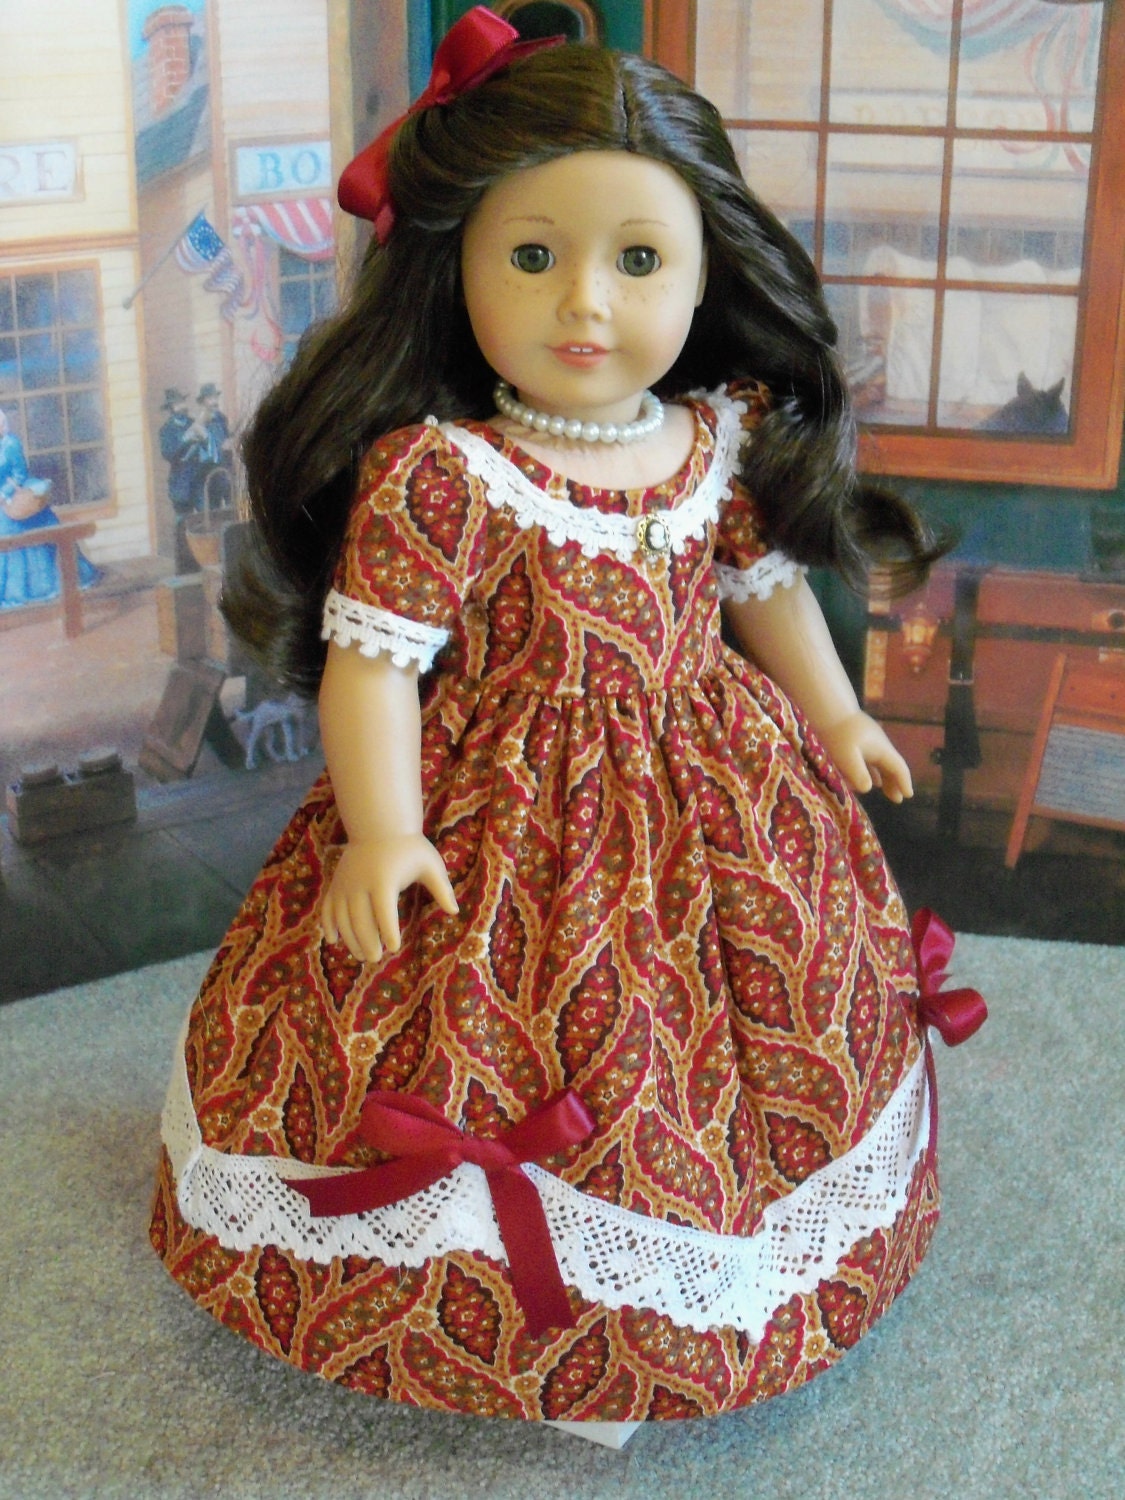 Cecile, Marie Grace  A Day on the Town Dress / Clothes for American Girl Dolls